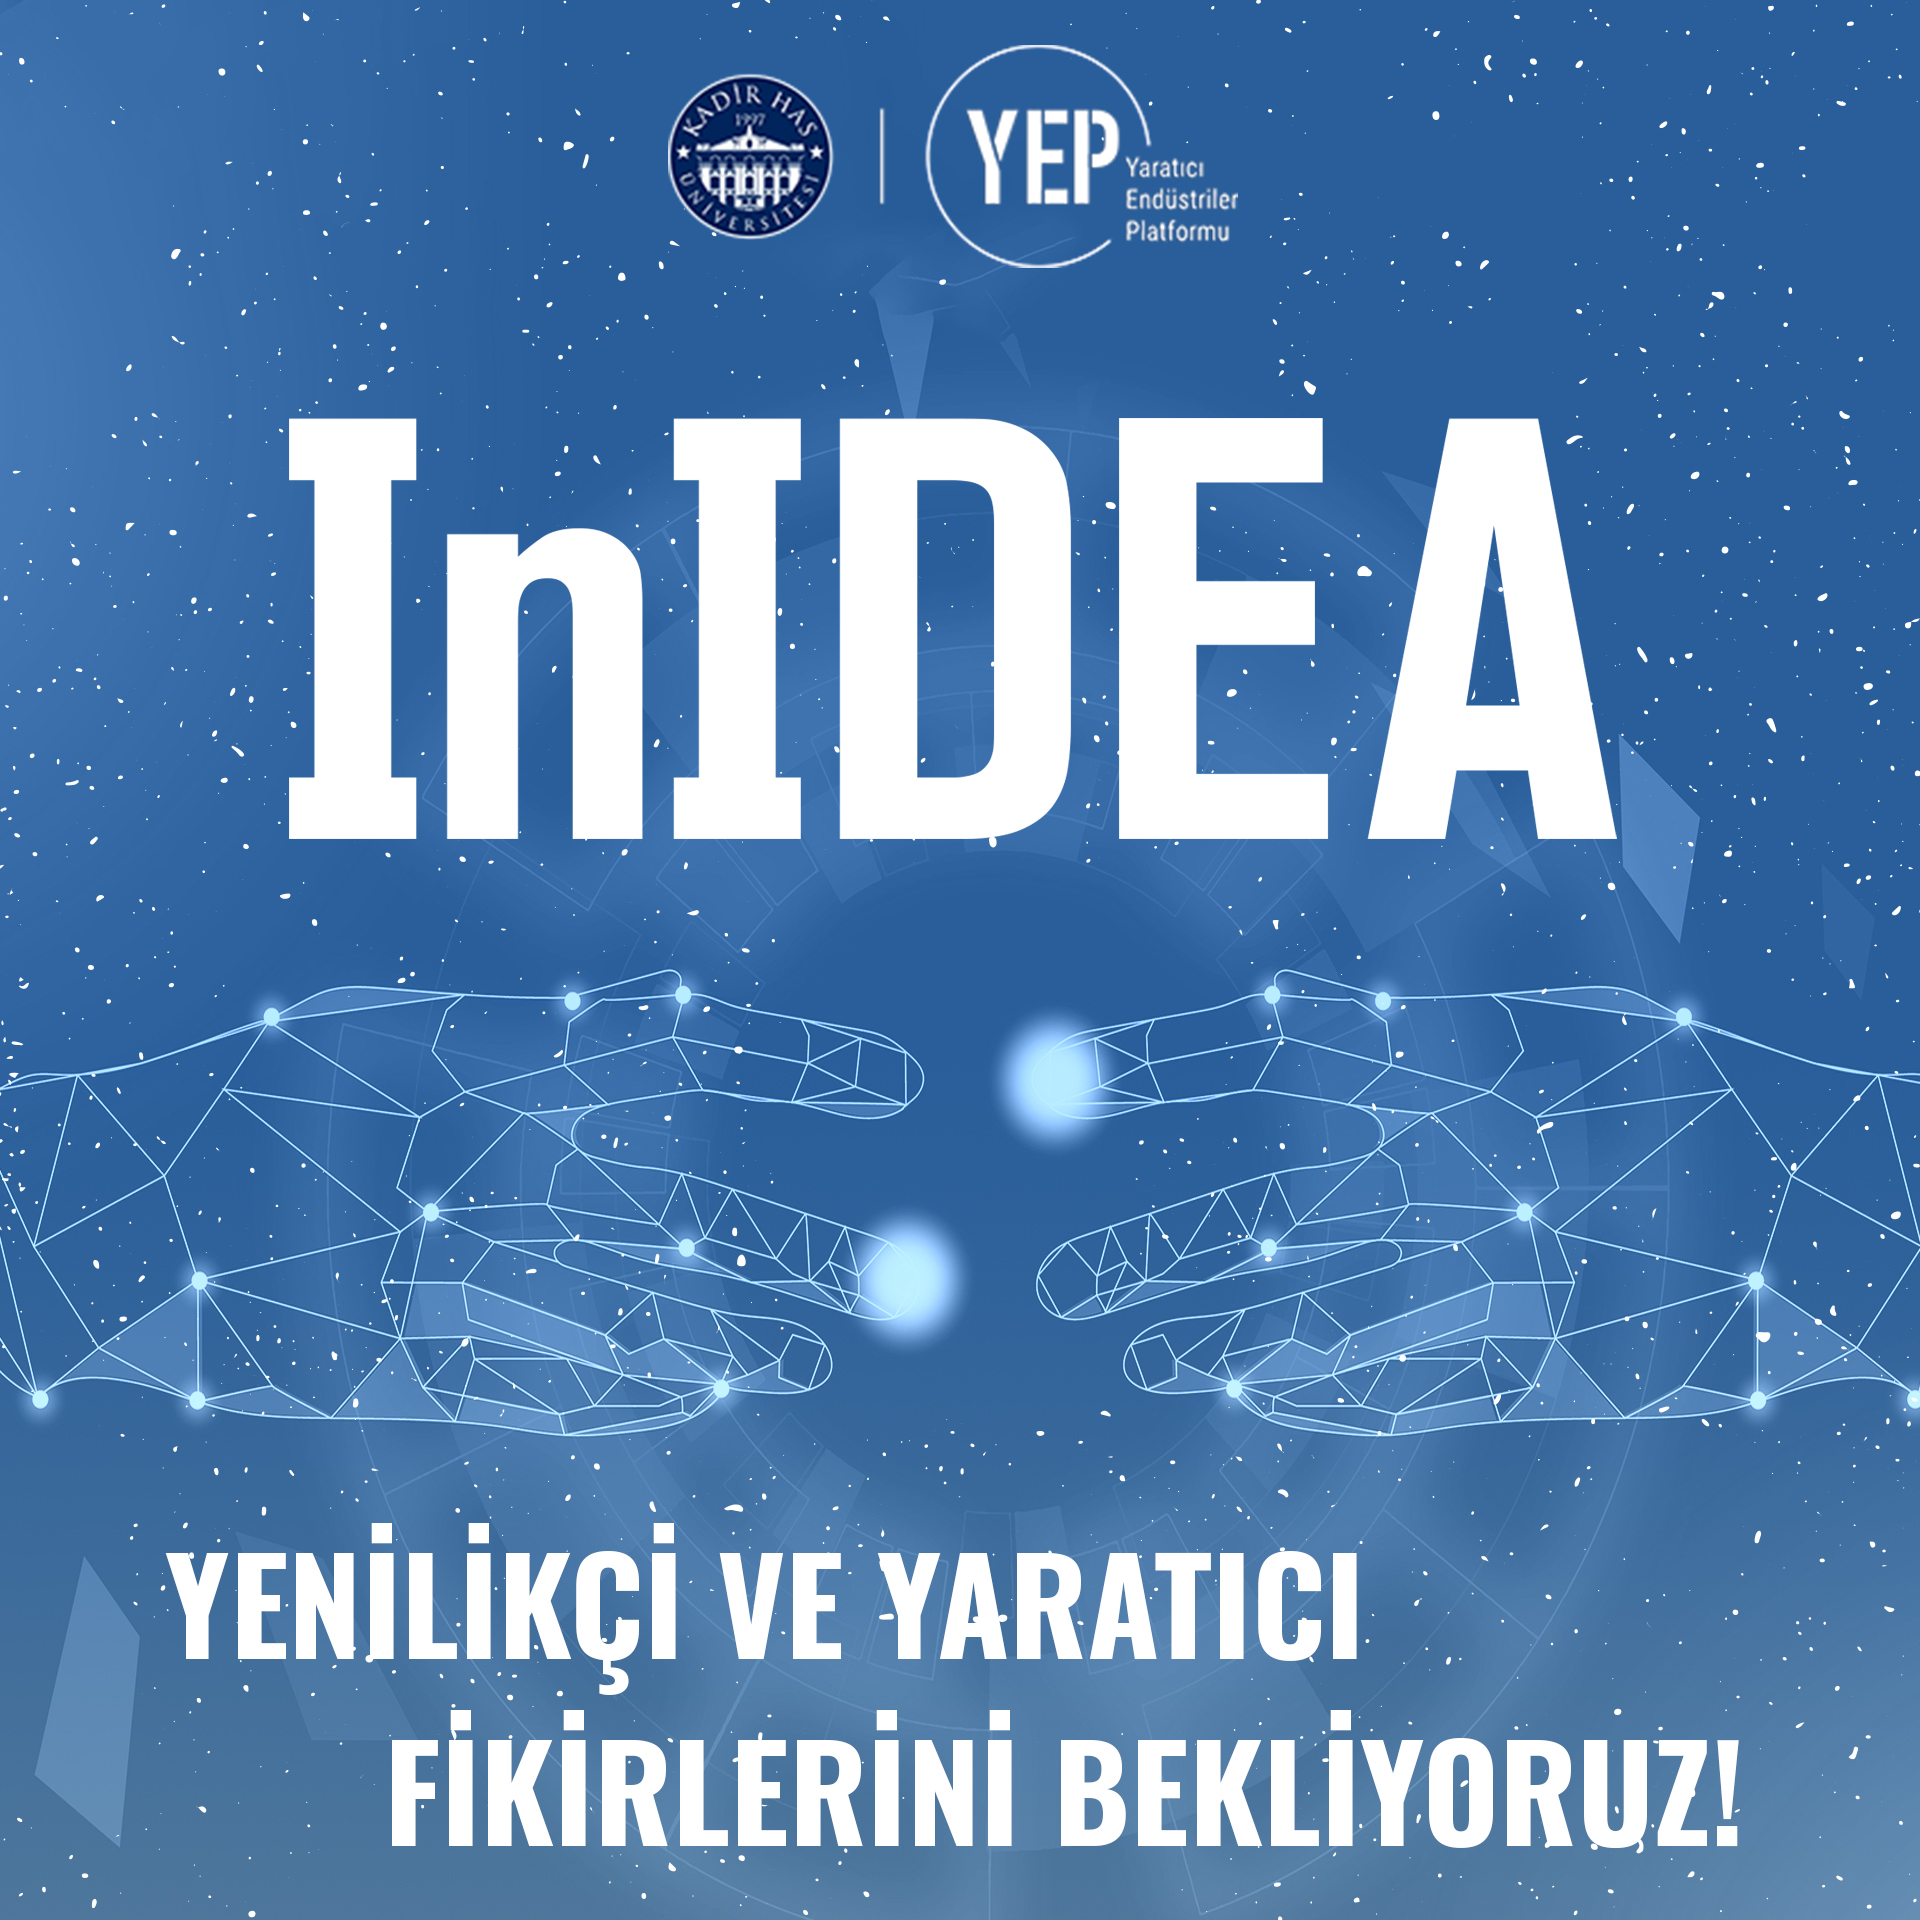 3 Projects Supported in the 5th Term of InIDEA